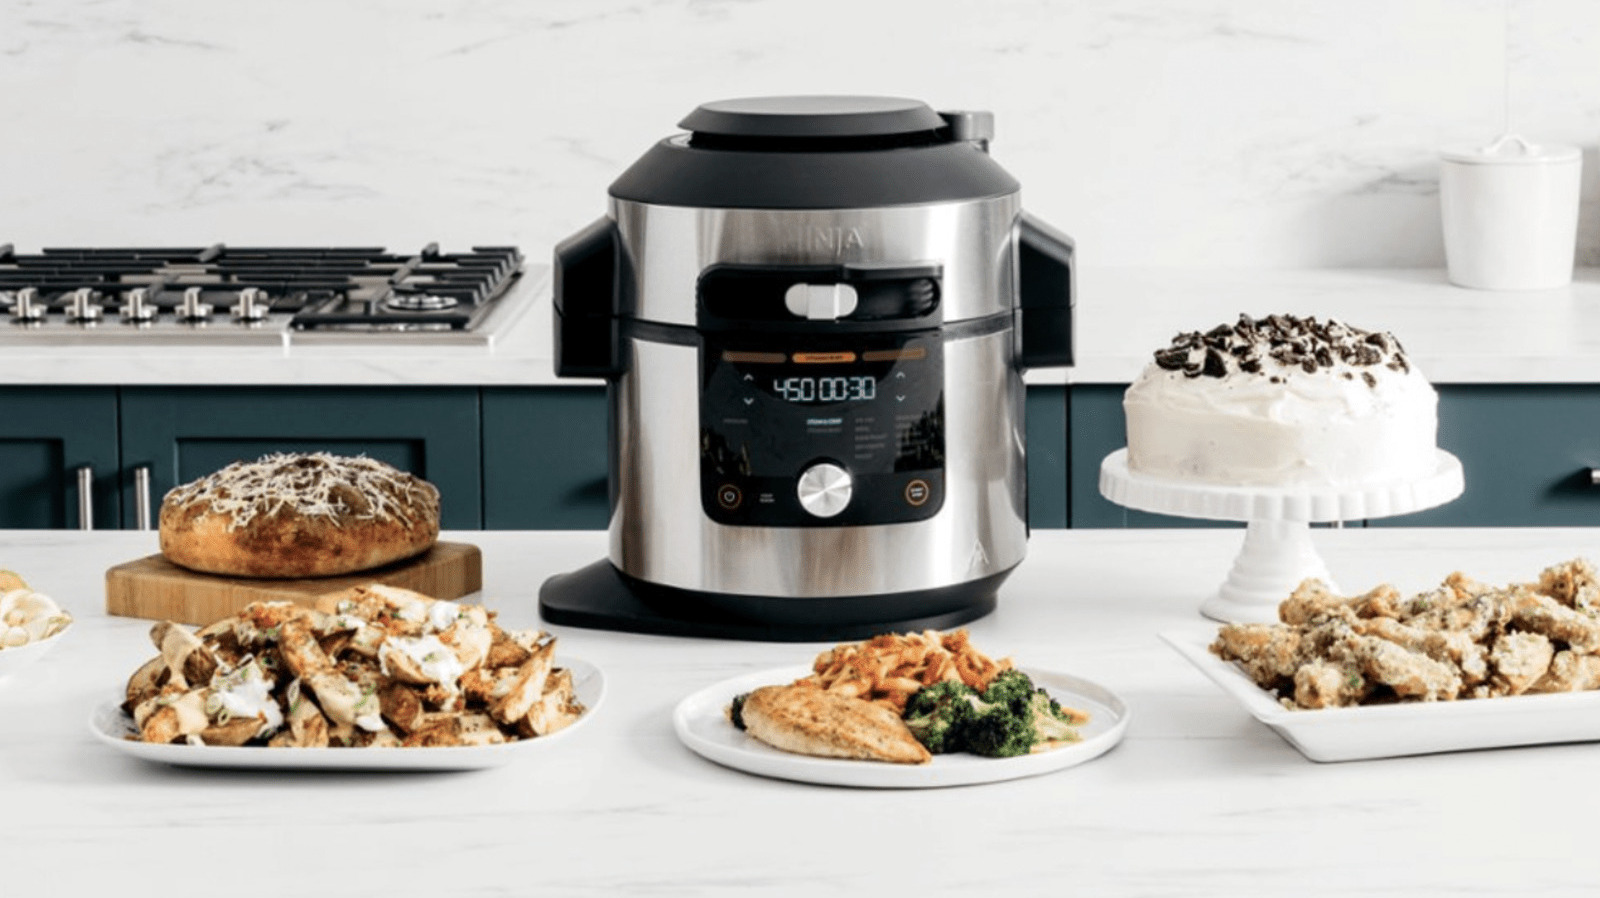 https://www.tastingtable.com/img/gallery/get-150-off-the-ninja-foodi-14-in-1-8qt-xl-pressure-cooker-steam-fryer-with-smartlid-right-now/l-intro-1700588124.jpg